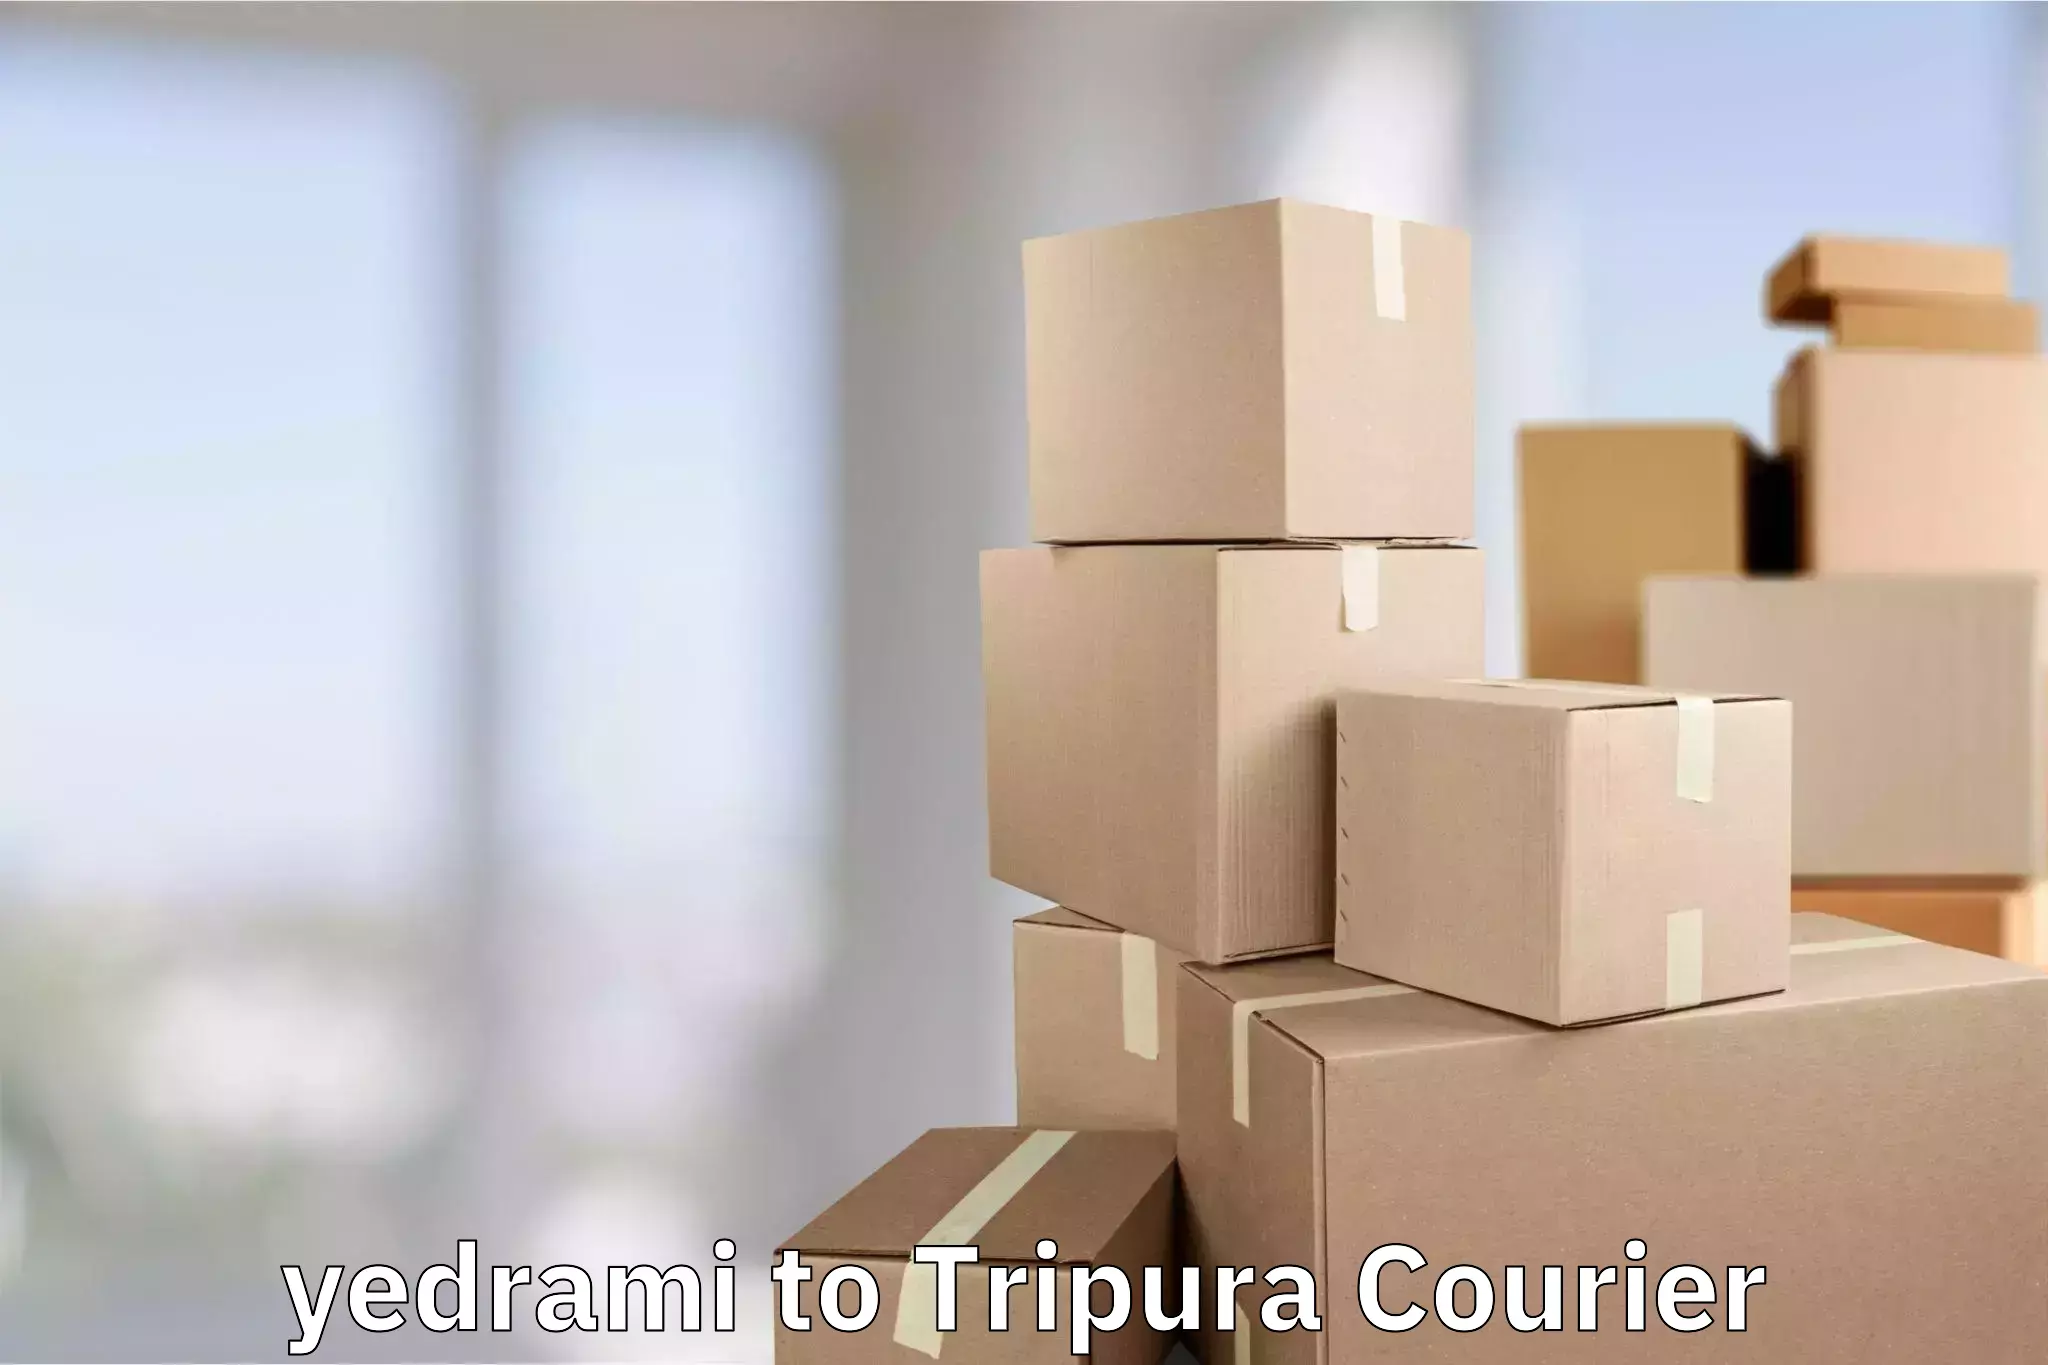 Personal effects shipping yedrami to Tripura